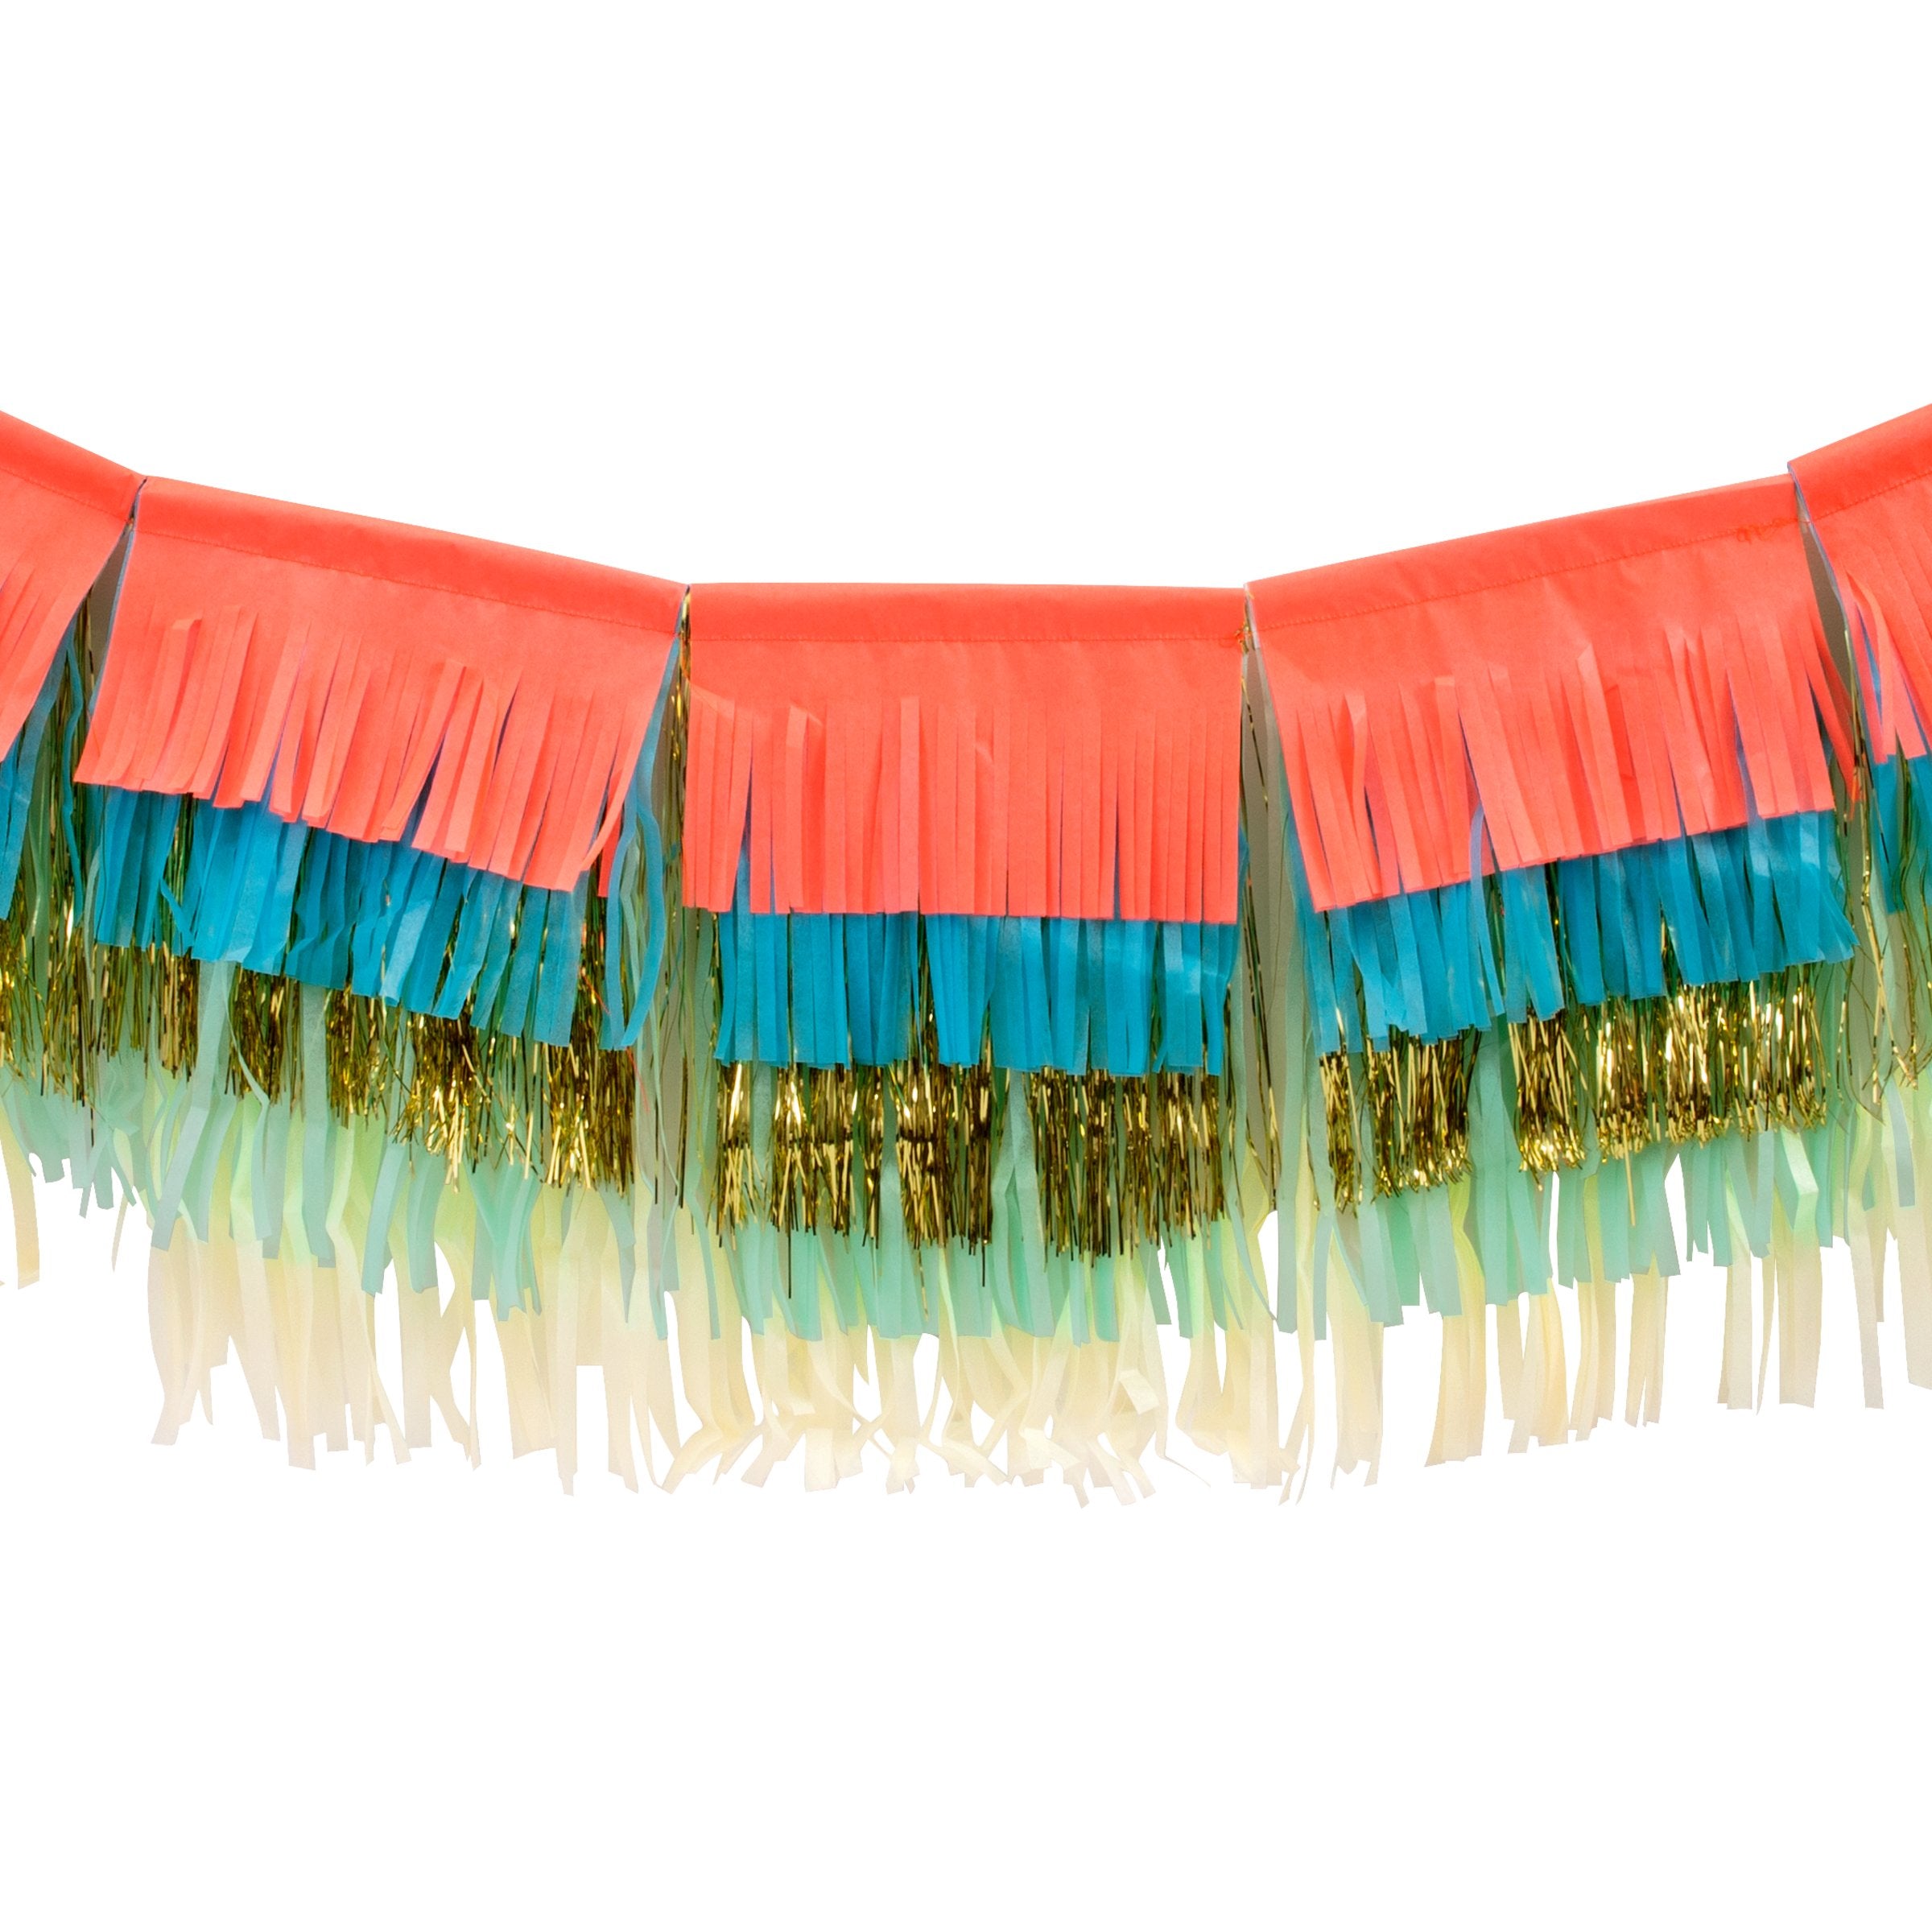 Our paper garland is pre-strung on ivory cord and has colorful paper and foil fringing to make any party room look amazing.